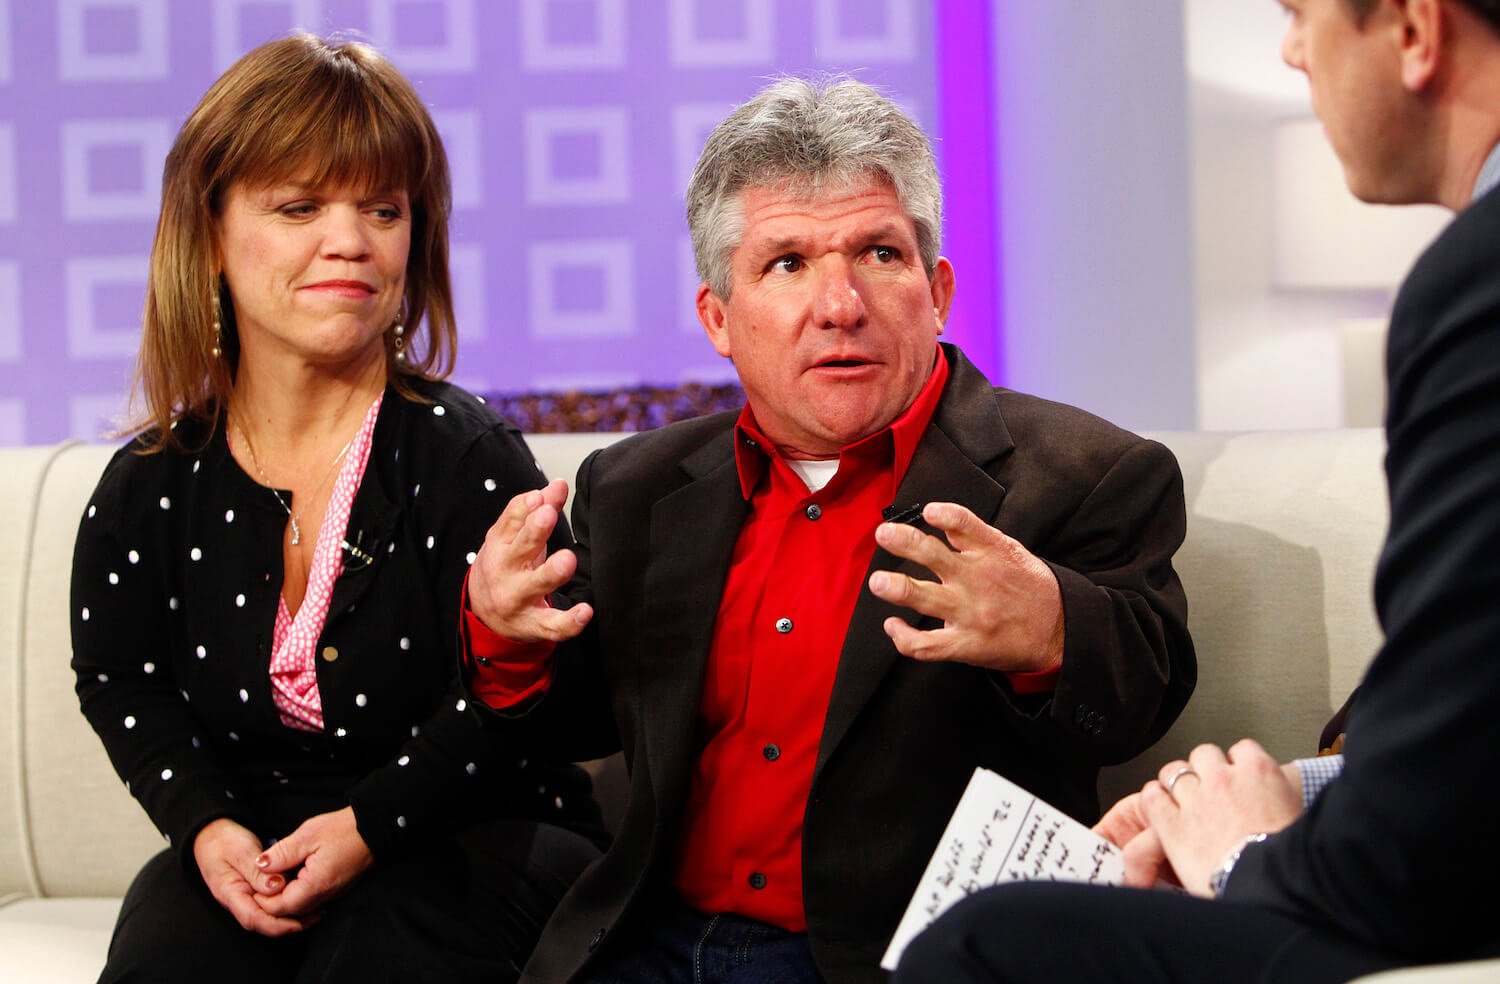 Amy and Matt Roloff from 'Little People, Big World' sitting together and speaking during an interview